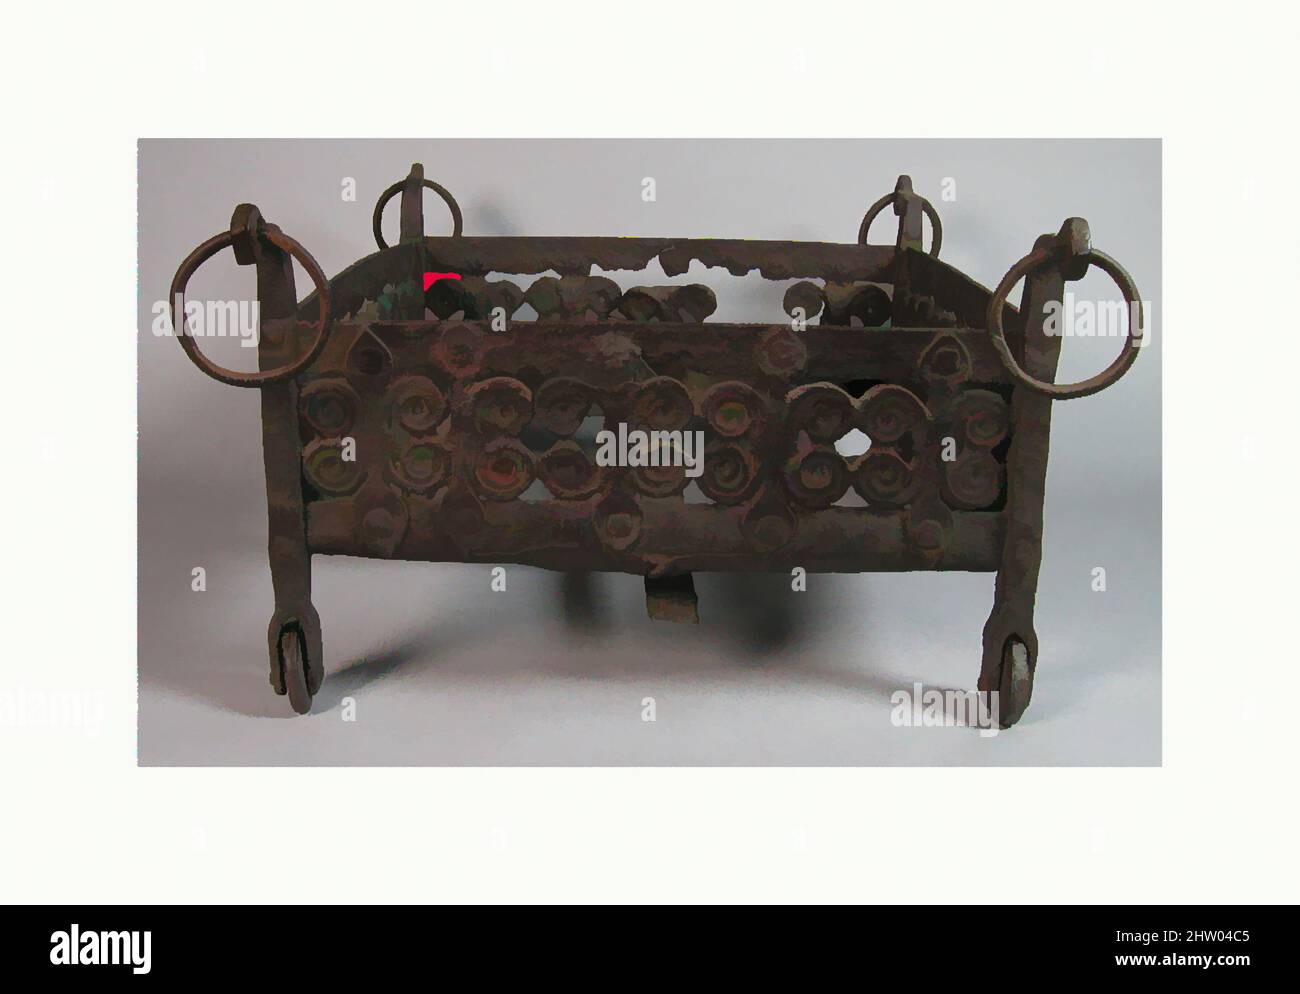 Art inspired by Brazier, 13th century, Spanish, Wrought iron, Overall: 10 x 14 3/4 x 19 in. (25.4 x 37.5 x 48.3 cm), Metalwork-Iron, Classic works modernized by Artotop with a splash of modernity. Shapes, color and value, eye-catching visual impact on art. Emotions through freedom of artworks in a contemporary way. A timeless message pursuing a wildly creative new direction. Artists turning to the digital medium and creating the Artotop NFT Stock Photo